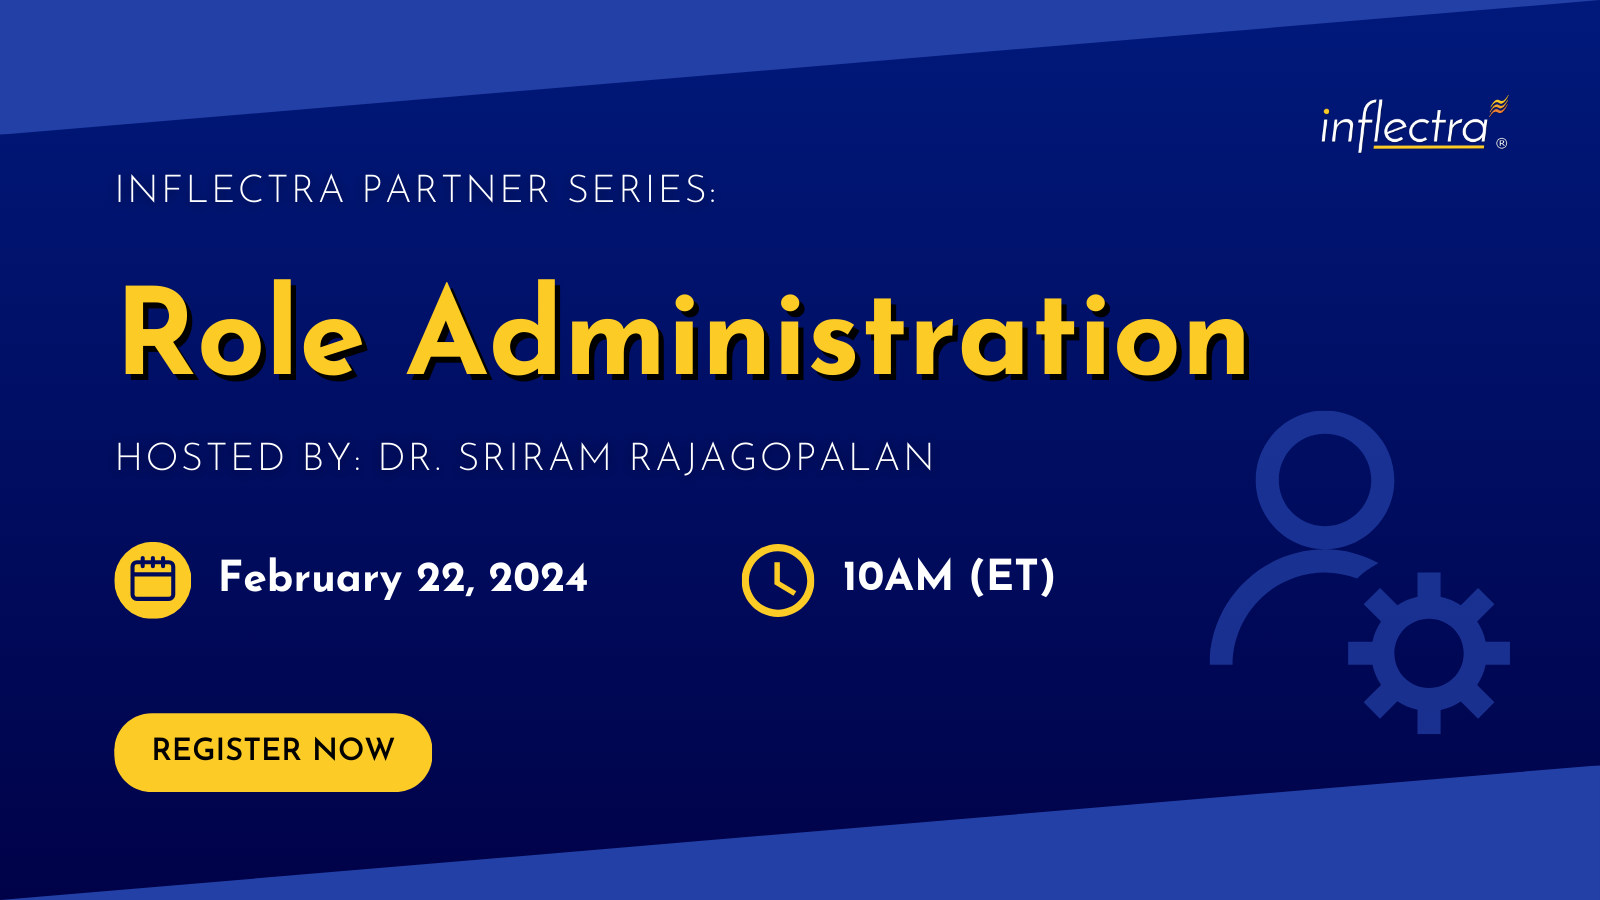 inflectra-partner-series-role-administration-hosted-by-sriram-rajagopalan-image